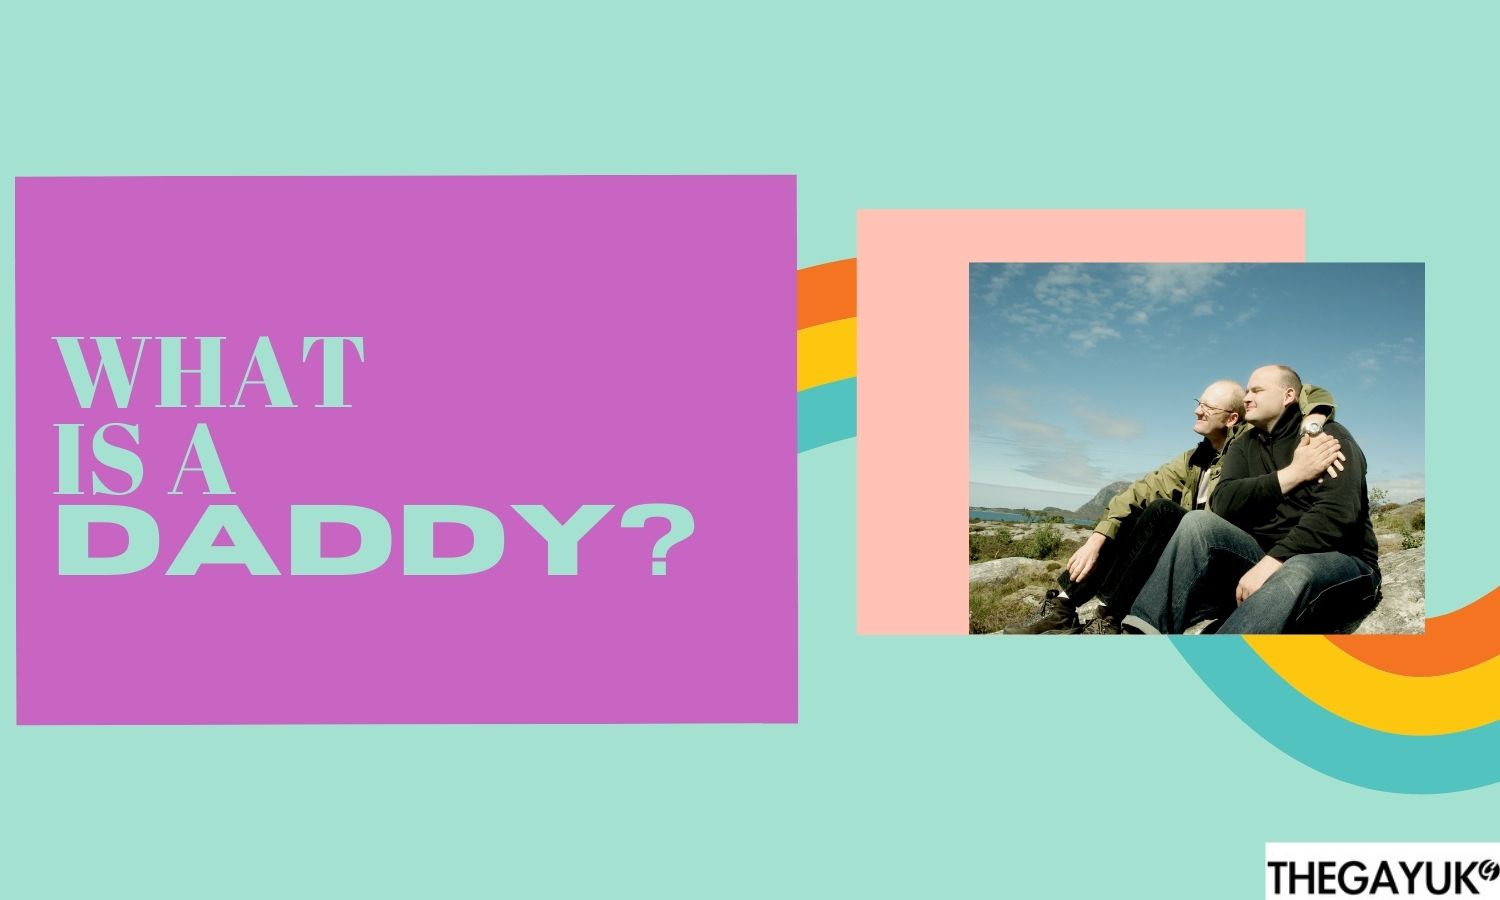 GAY DATING | What is a “daddy” on a dating app?